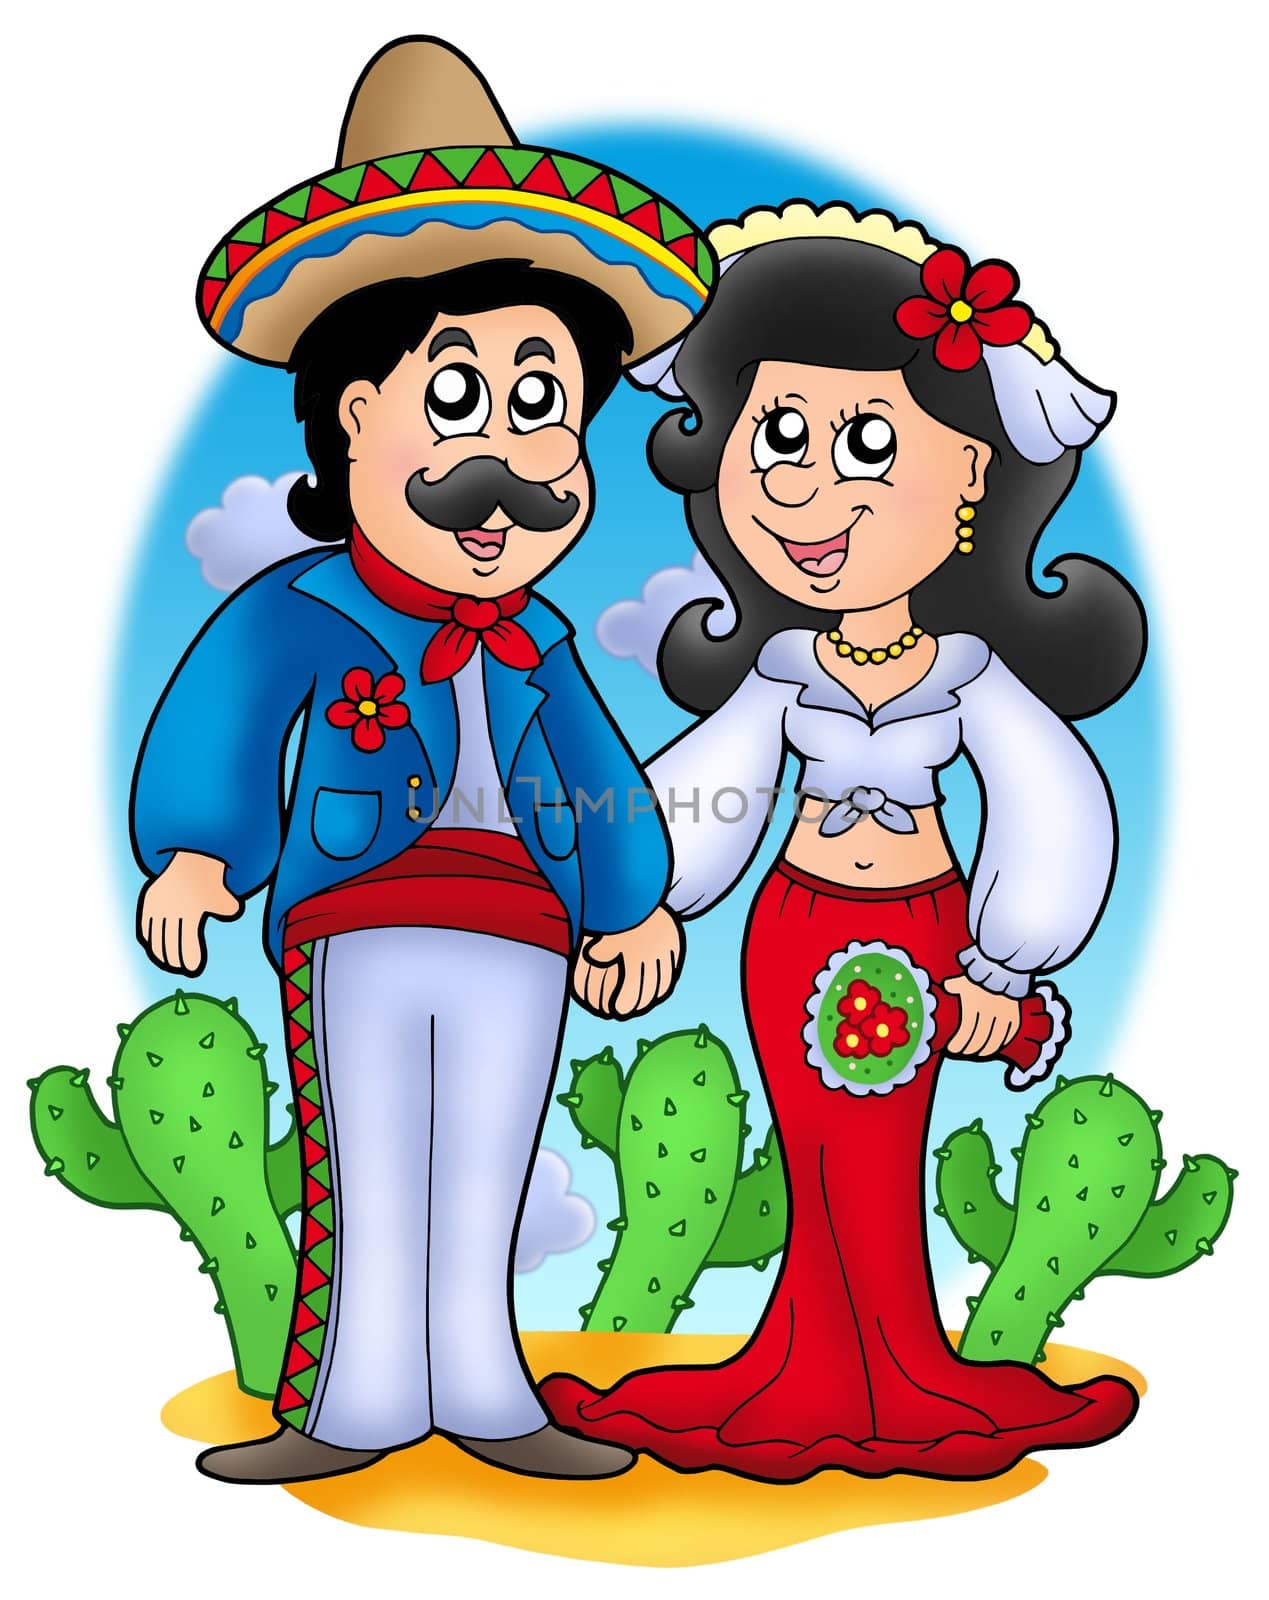 Mexican wedding couple by clairev